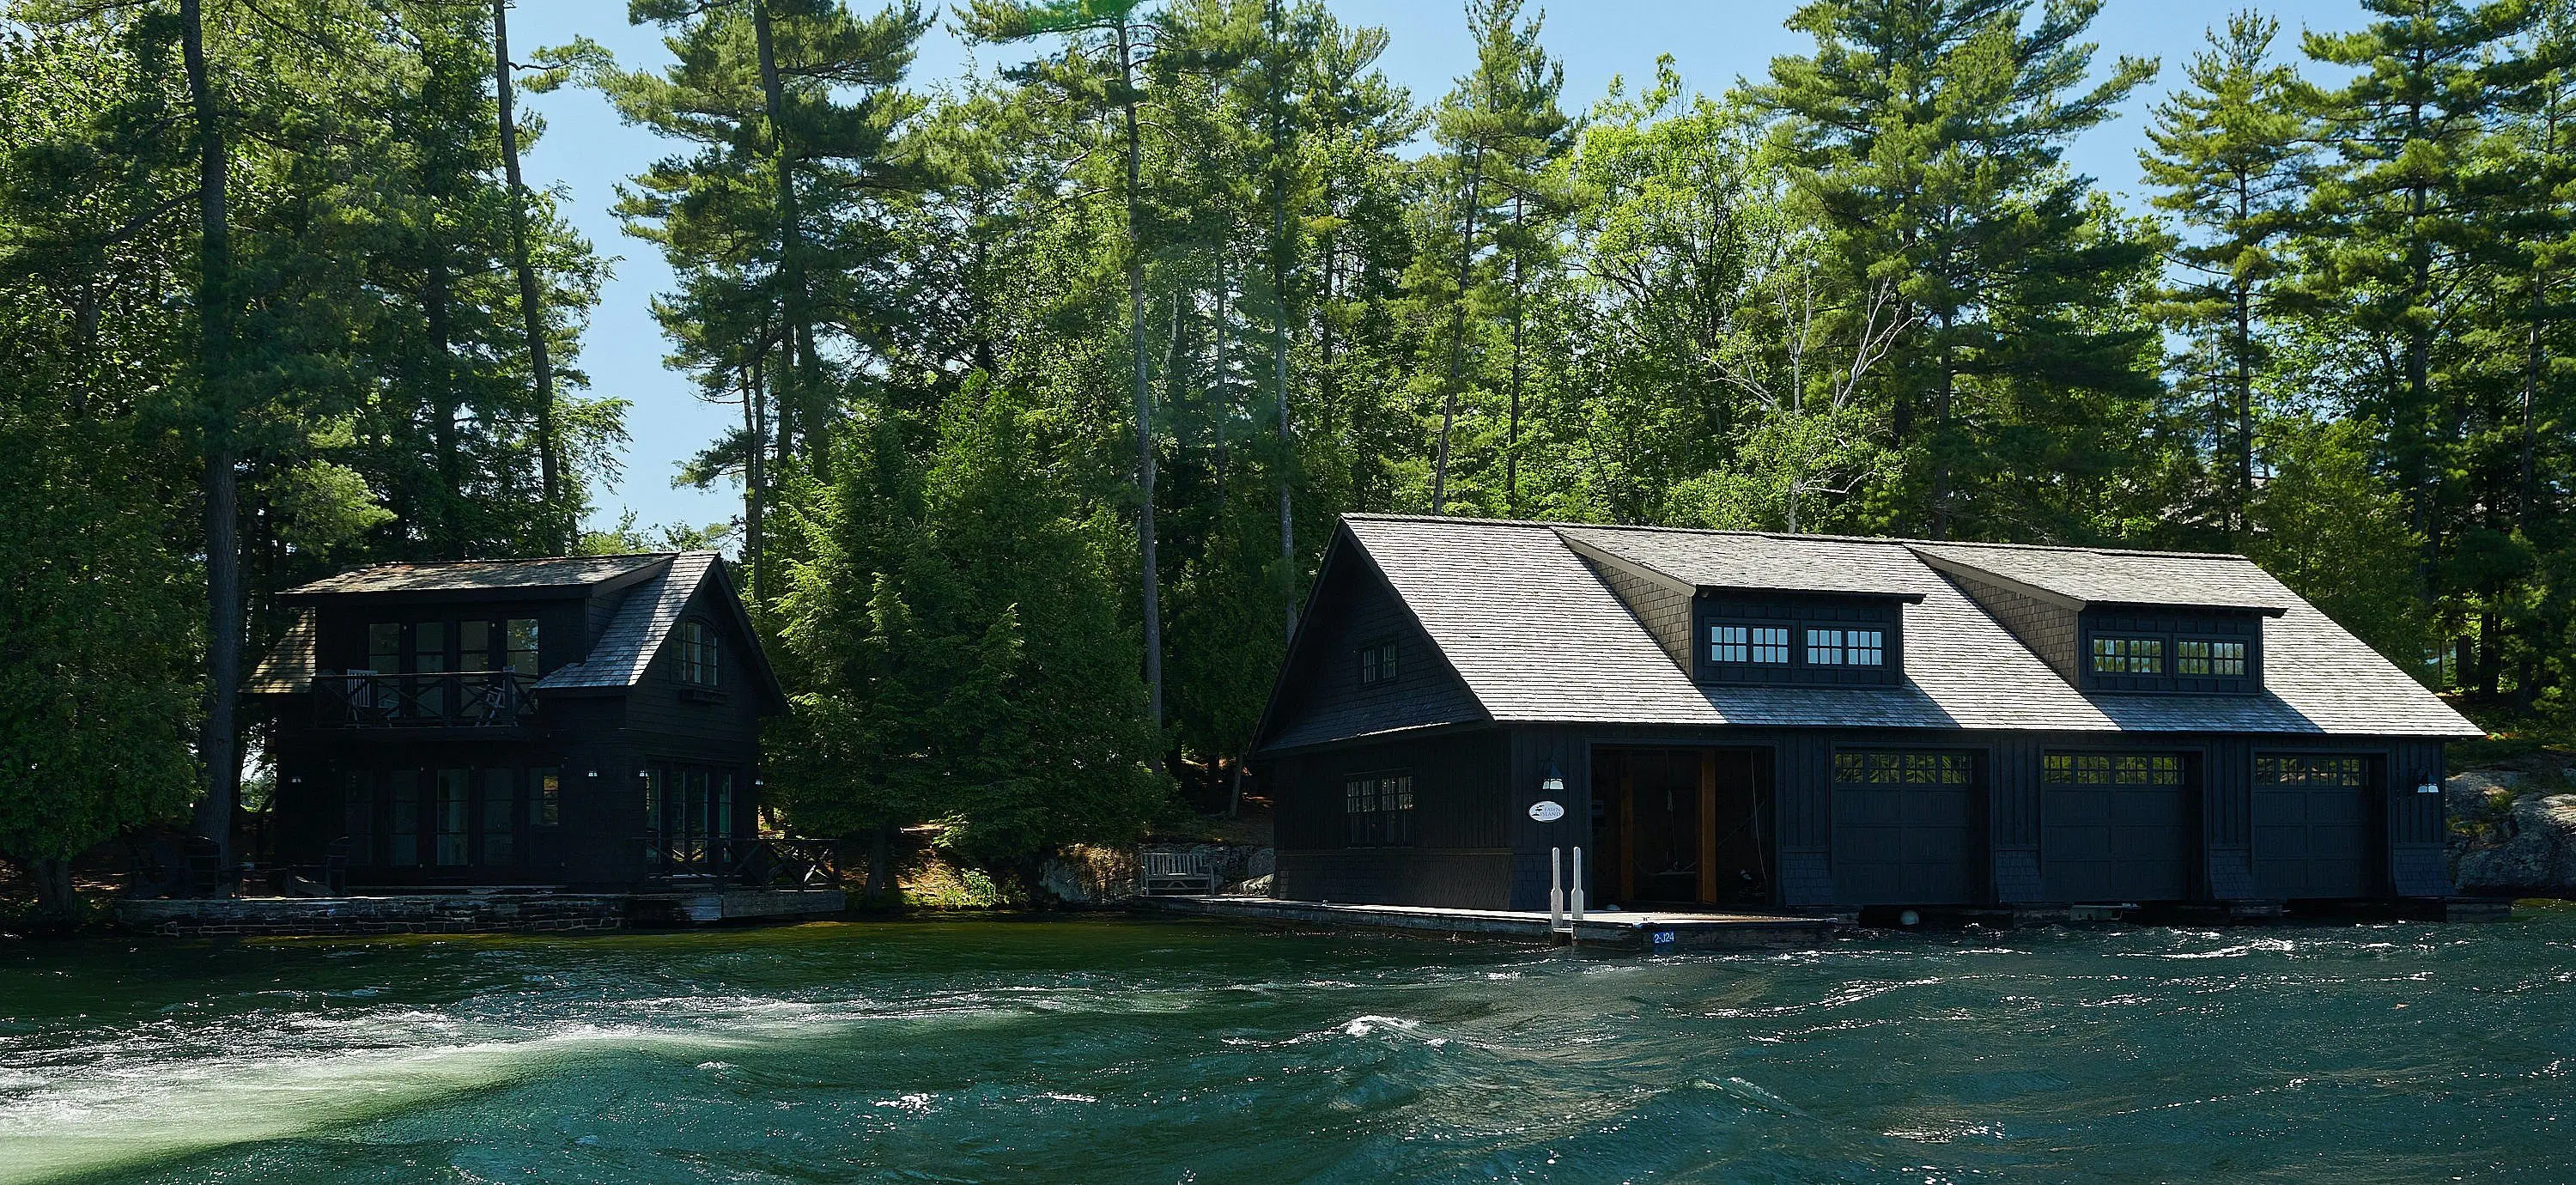 Oatley's stately cottage is nestled on an island in Lake Joseph, across from Sugarloaf. He boats by Azouri's construction zone on his way to and from the mainland. 